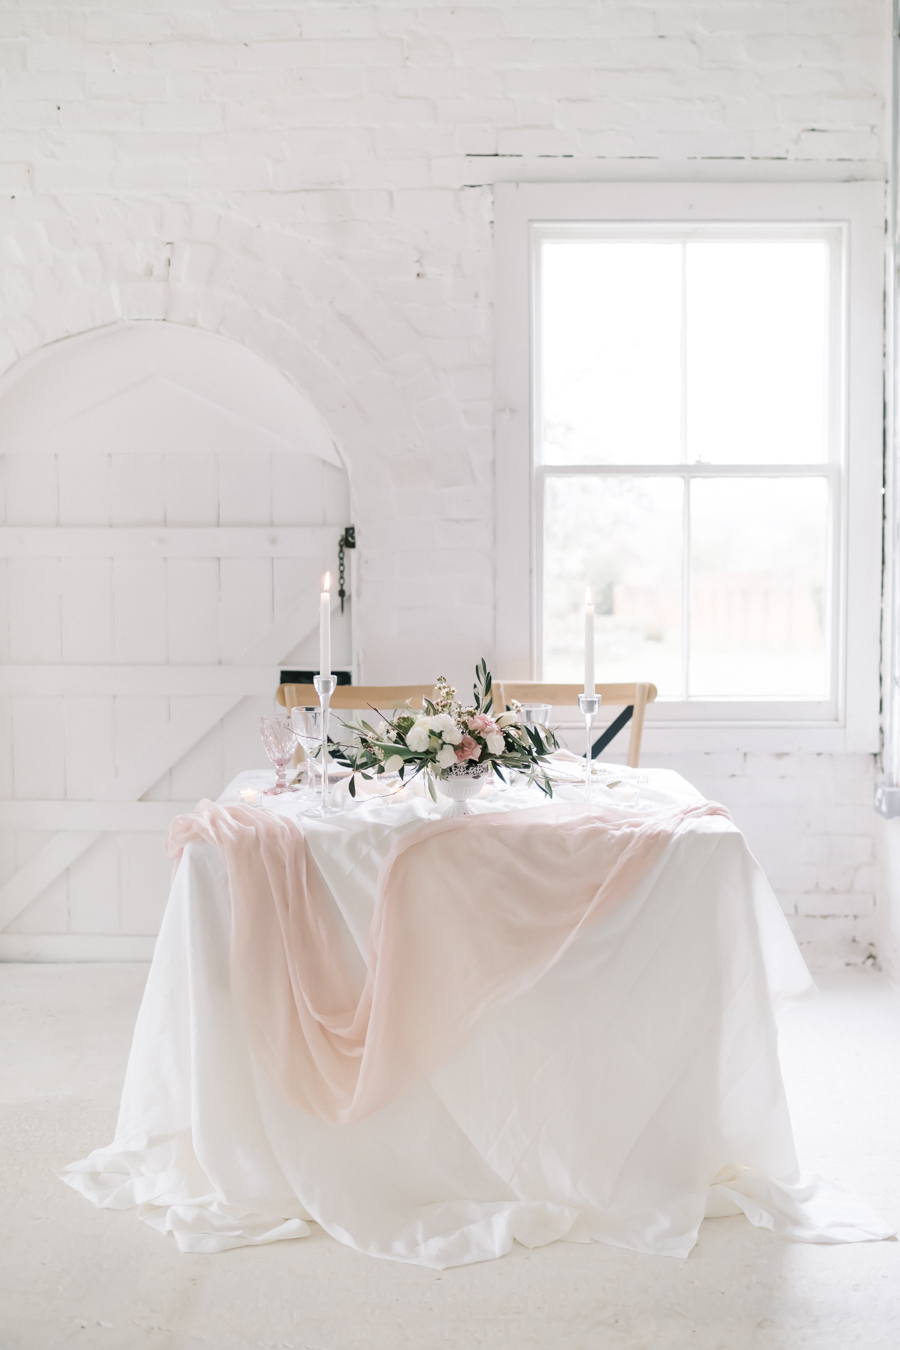 Spring blossom wedding style inspiration and ideas with Chloe Ely Photography at Barton Court (33)